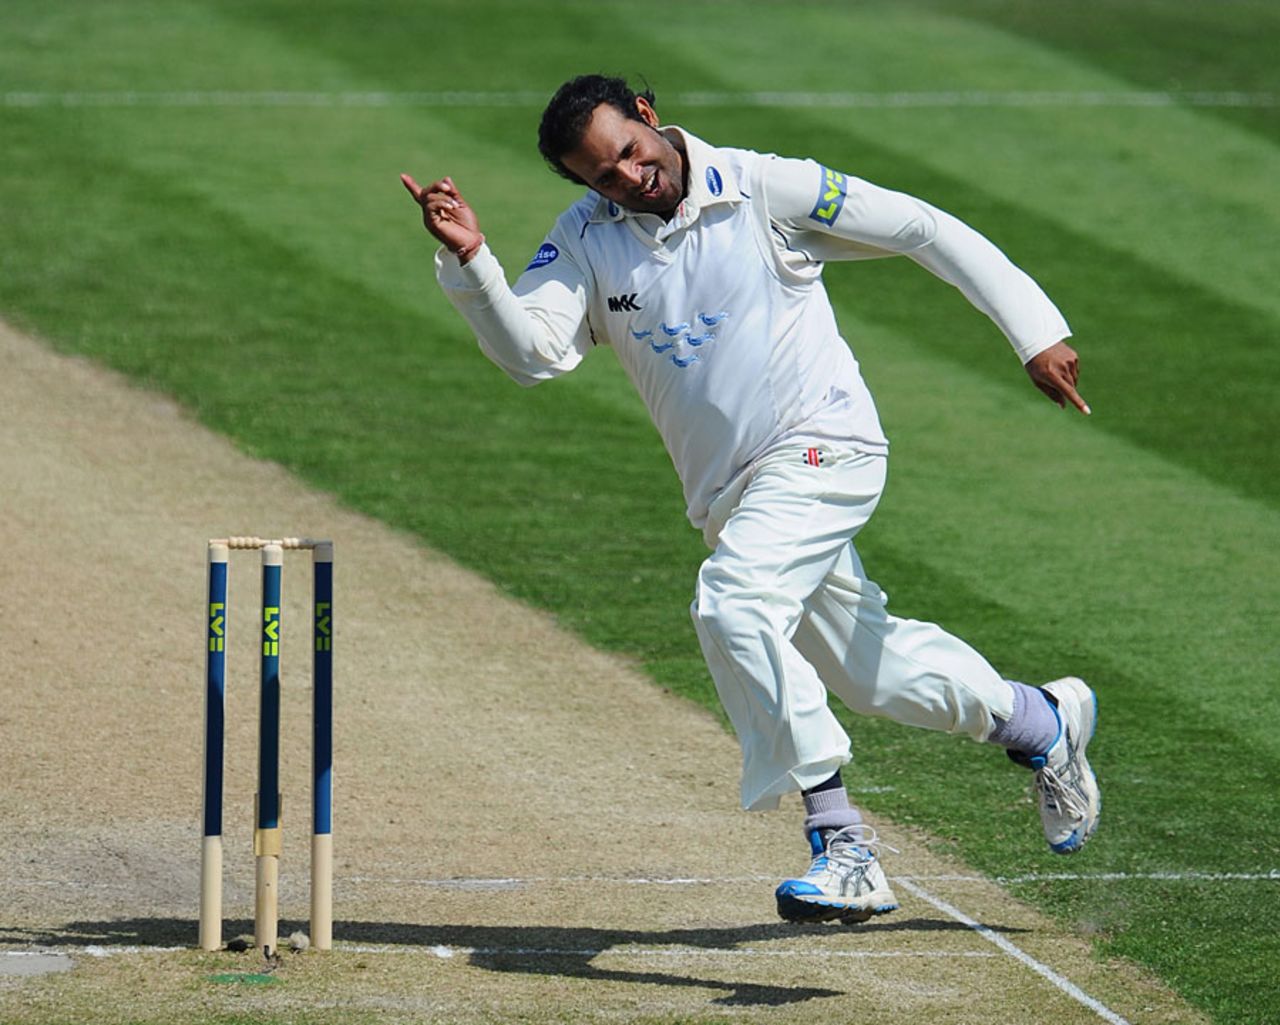 Rana Naved took early wickets for Sussex on the second day, Sussex v Nottinghamshire, County Championship Division One, Hove, 1st day, May 11, 2011